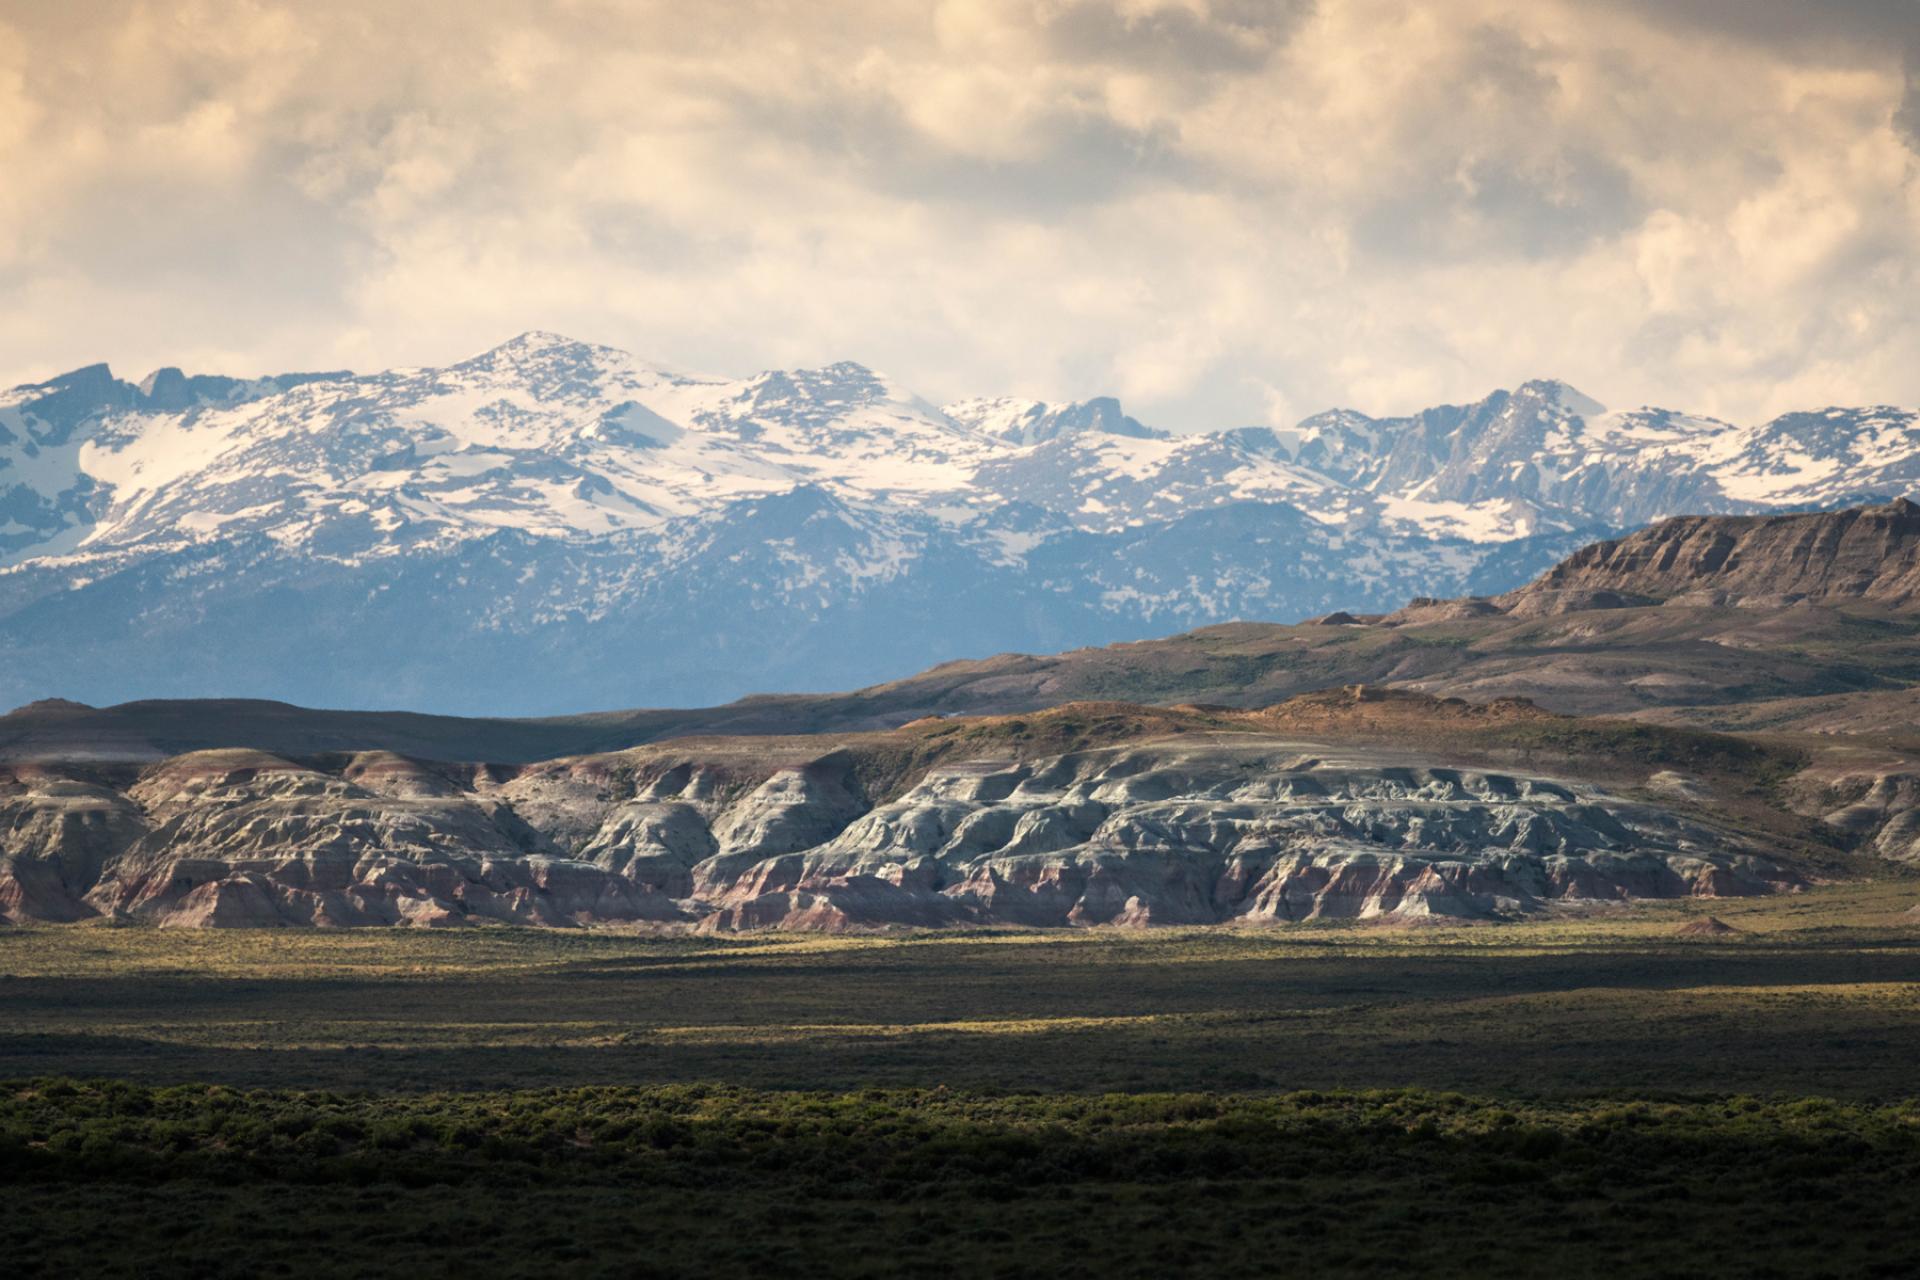 Snow capped mountains rising behind sandstone badlands and sagebrush under a cloudy sky in the Northern Red Desert, Wyoming